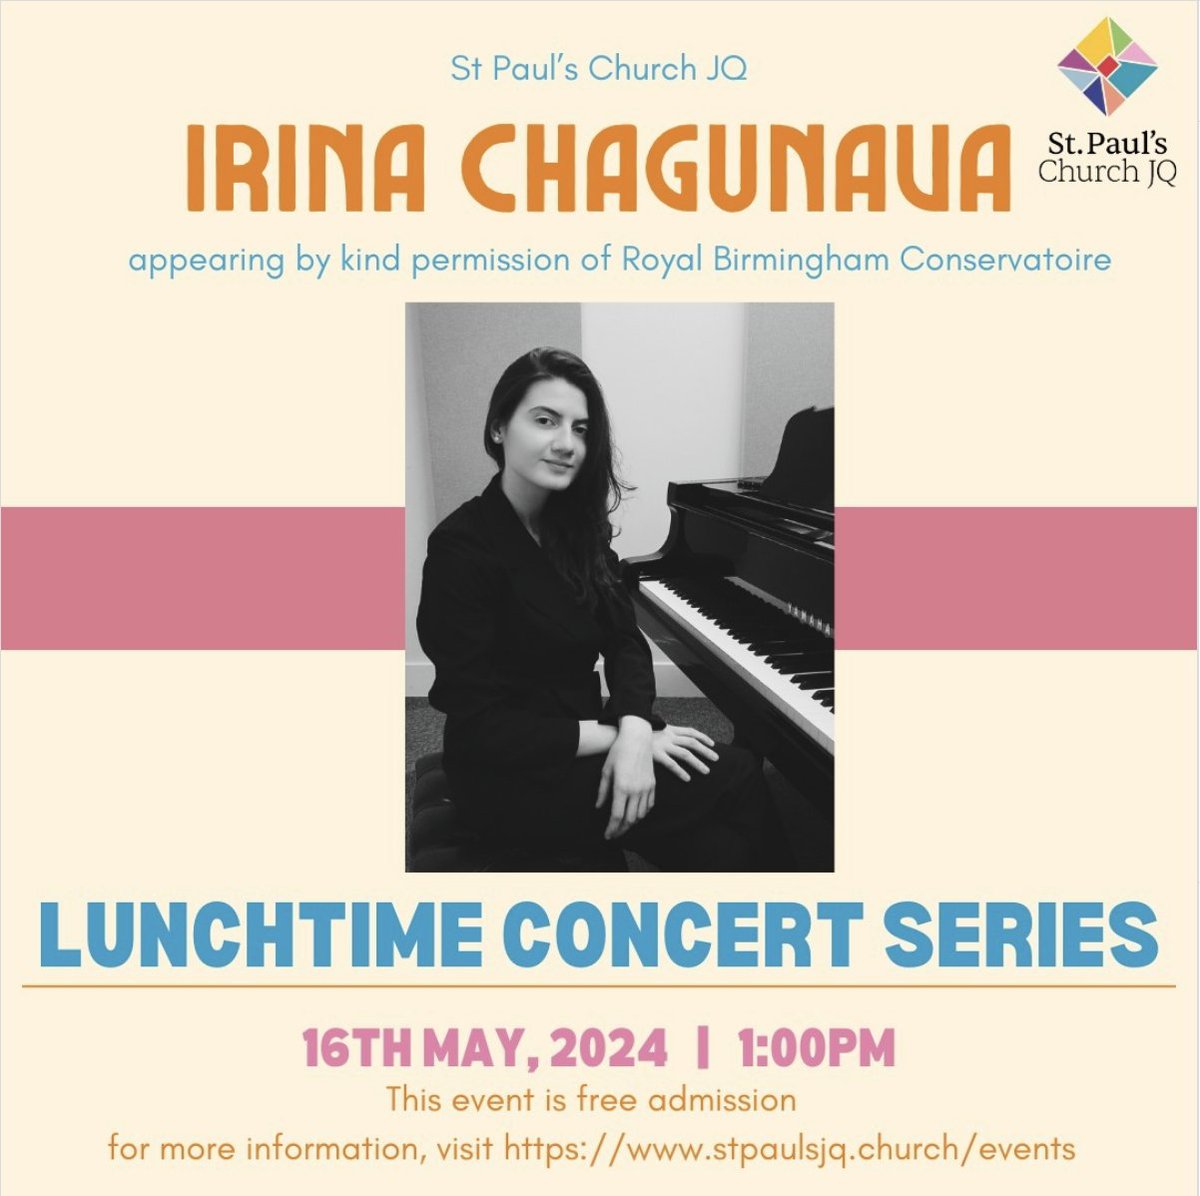 🎵 St Paul's Church JQ are excited to welcome Irina Chagunava, pianist studying at Royal Birmingham Conservatoire, for TODAY'S Lunchtime concert. 🎵 🌟16th May, 1pm, free admission🌟 With thanks to @BirmCons